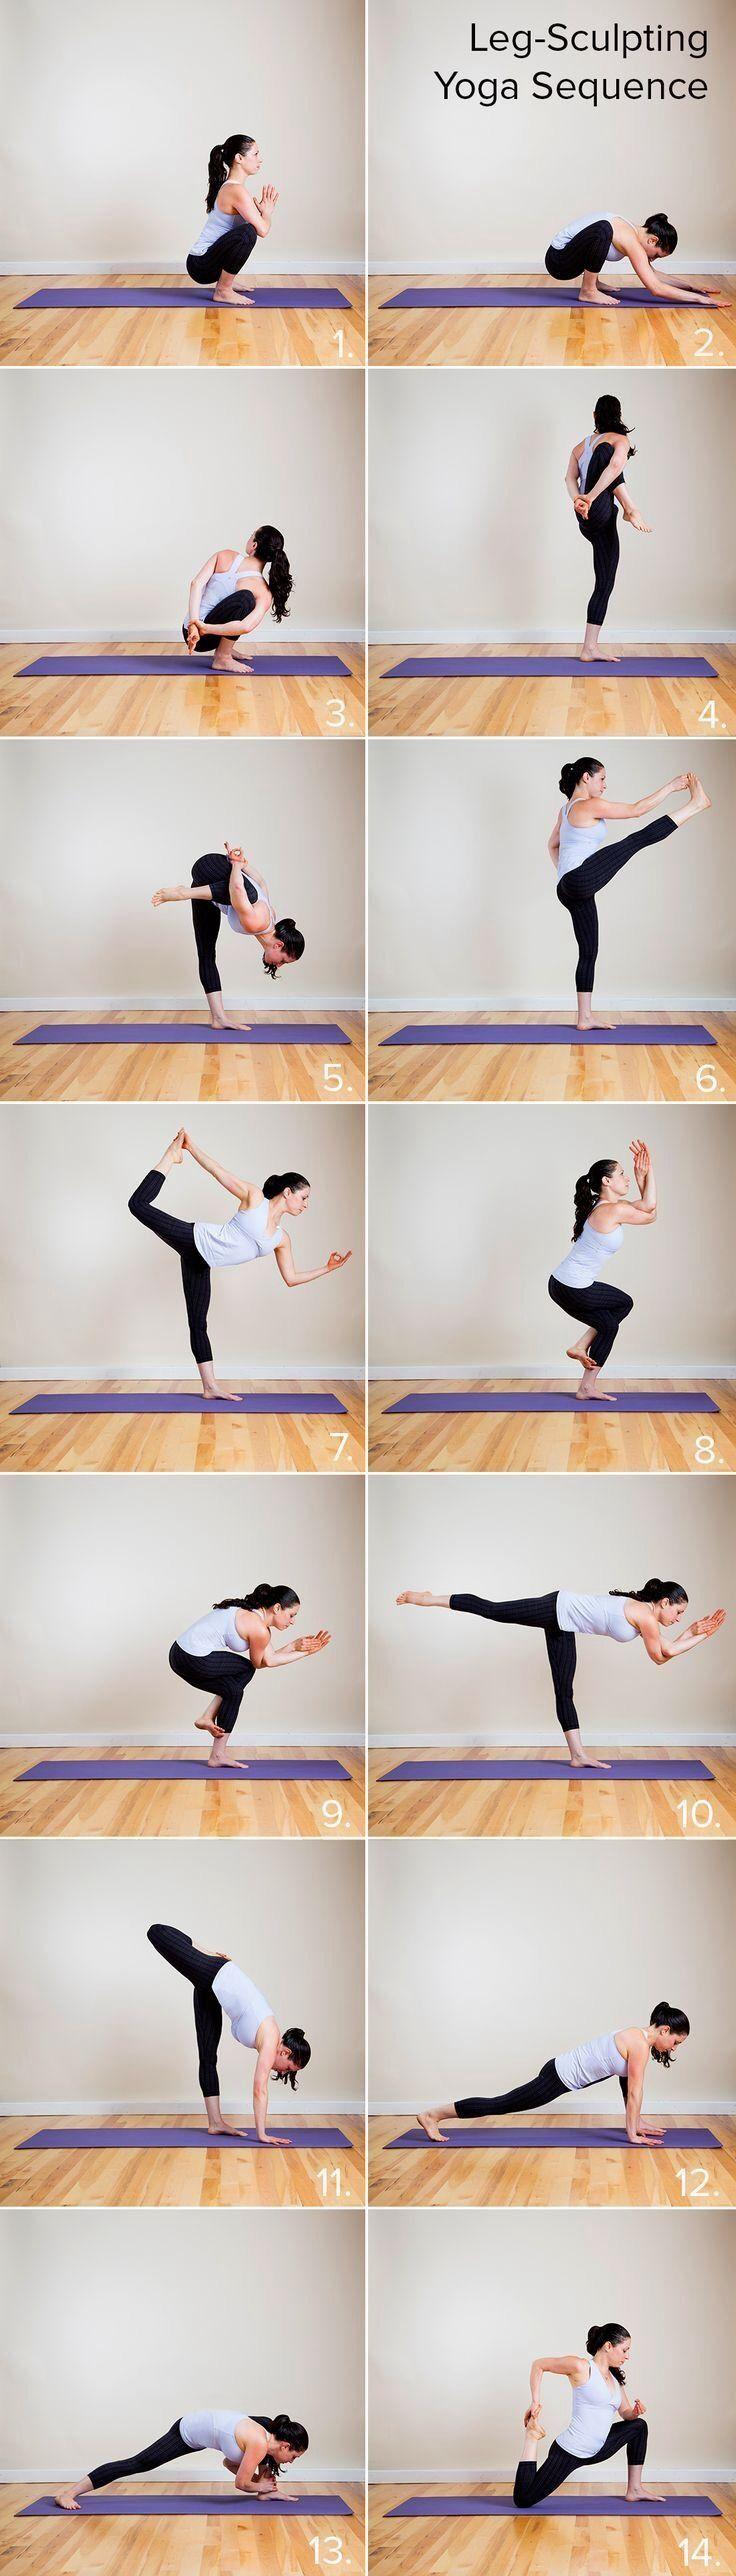 Hochzeit - Holy Hot! Yoga Sequence To Do Your Tight Pants Justice